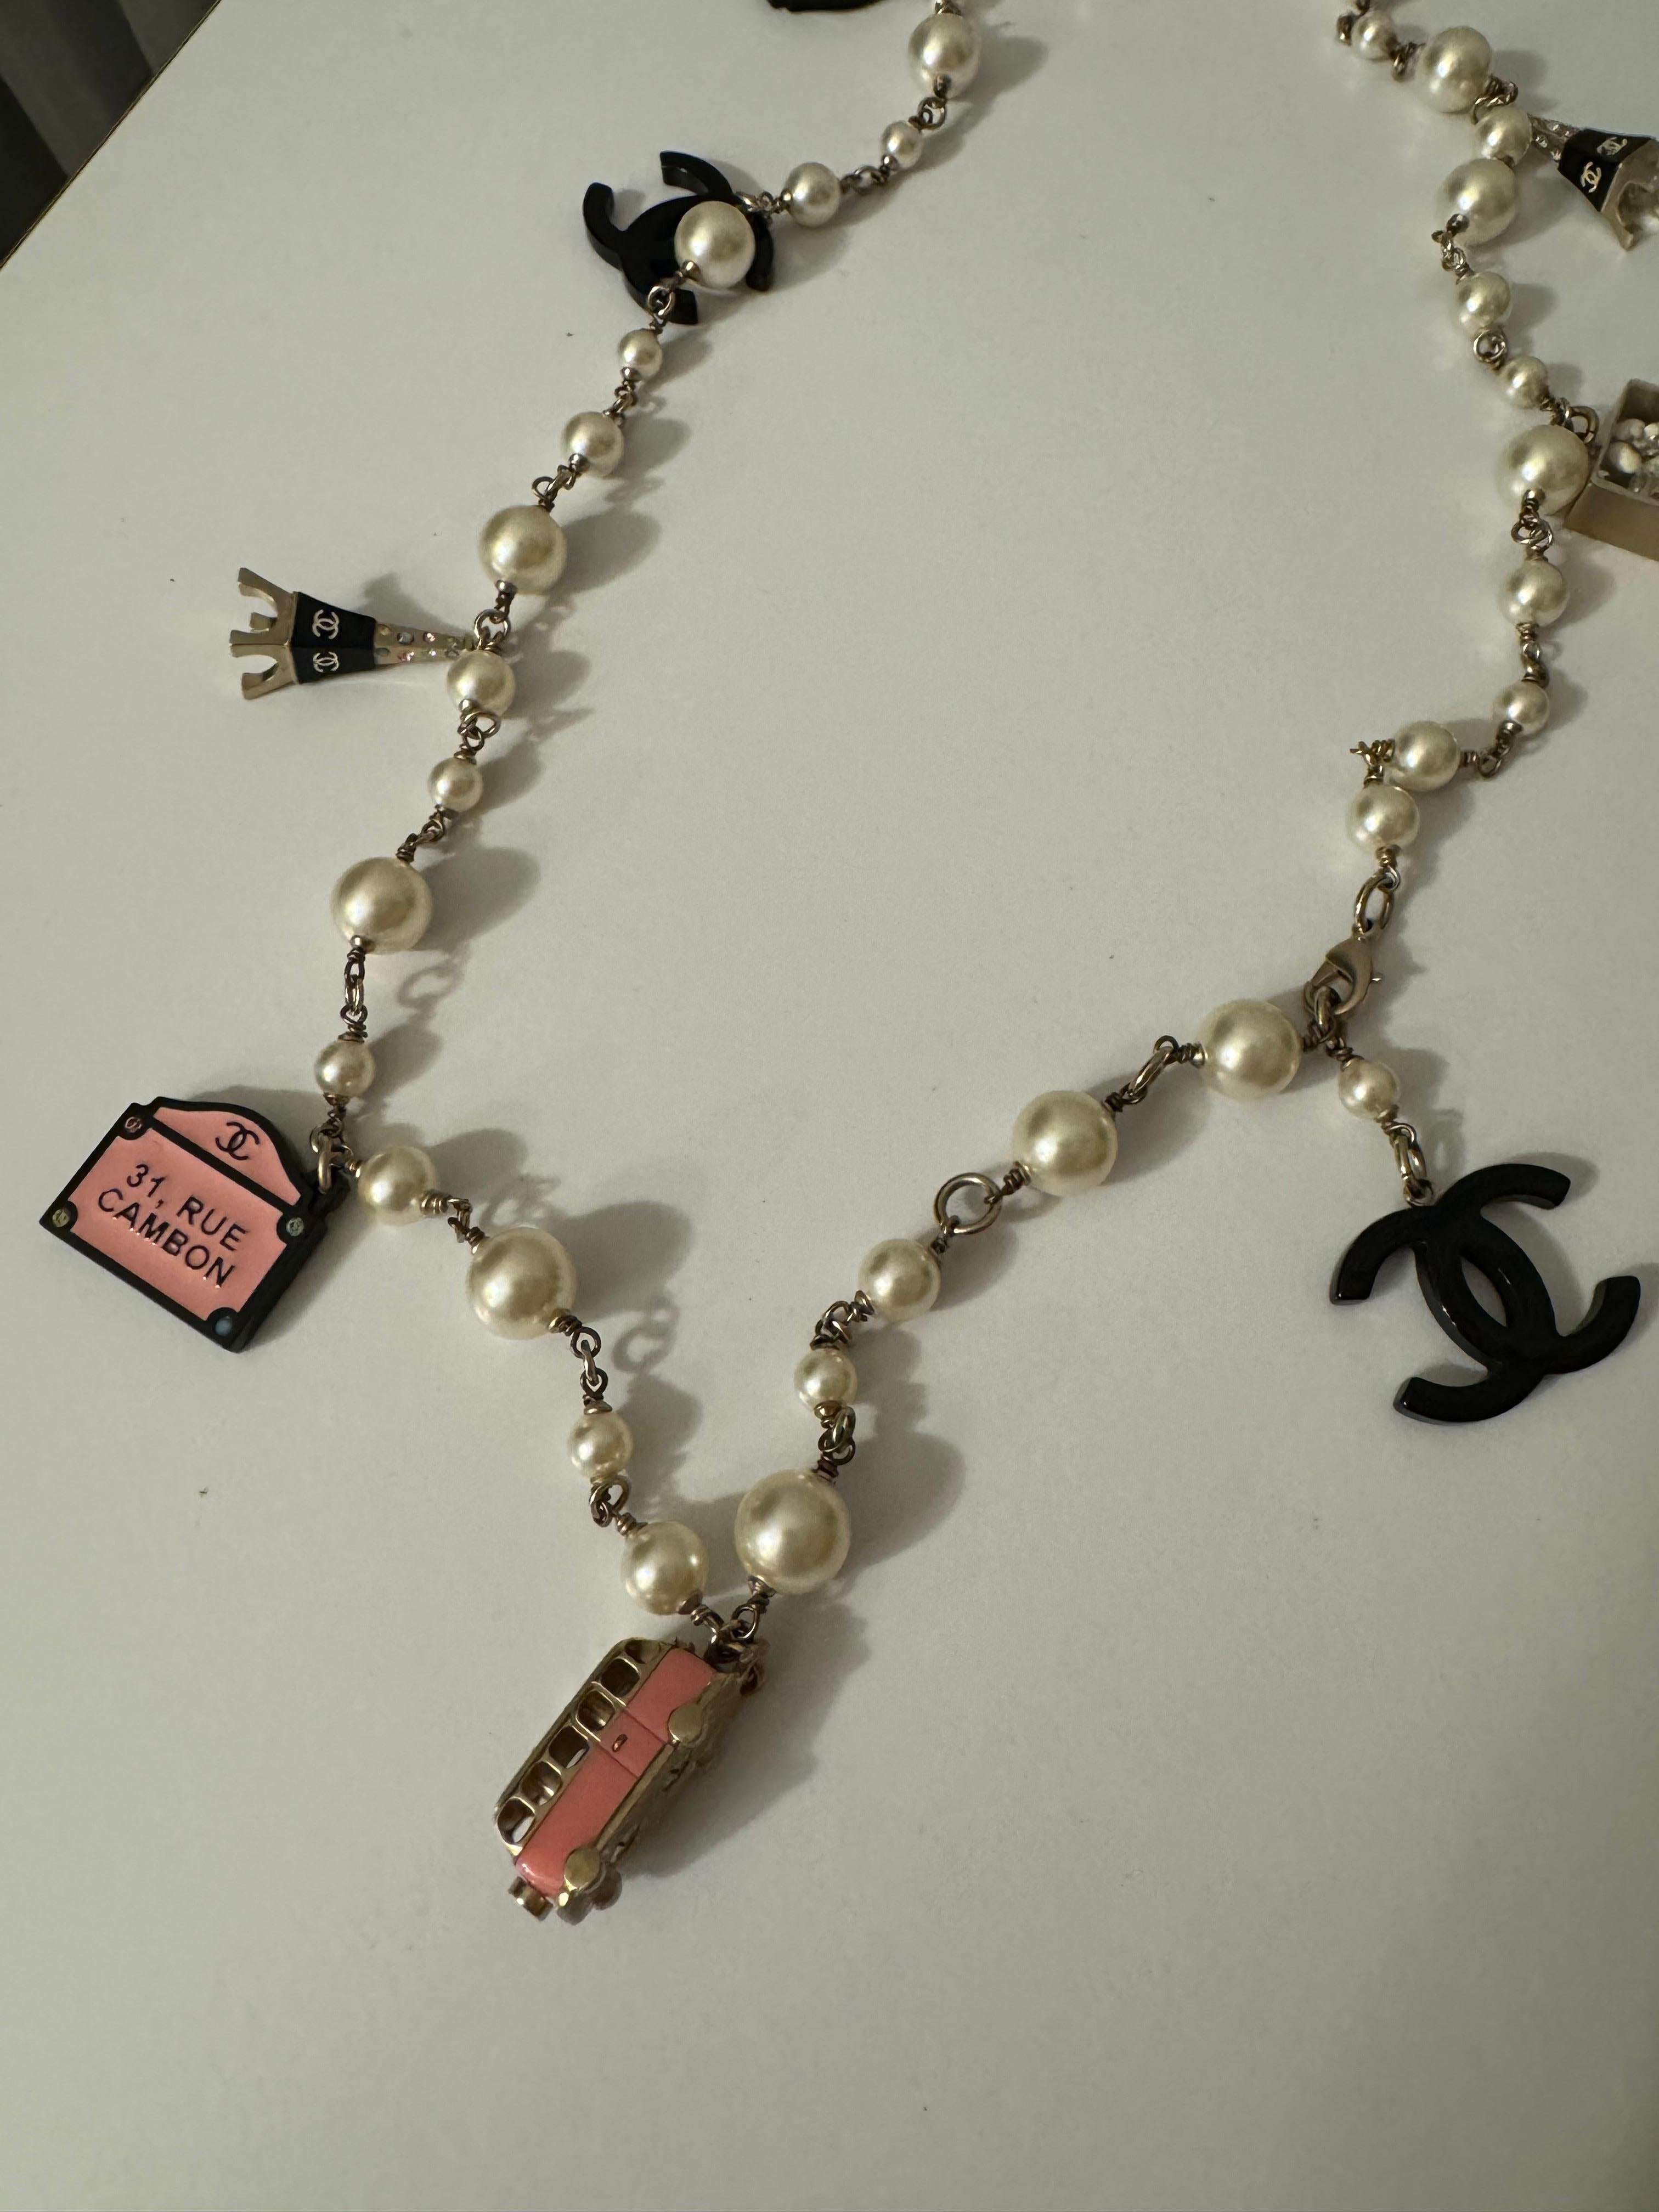 Chanel Gold Metal, Pink, Black, White Resin, Enamel, Strass, and Imitation Paris Souvenir Charm Necklace, 2006

like new

Dimensions

Height: 17.5 inches / 44.45 cm
Width: 0.39 inches / 1 cm
Depth: 0.39 inches / 1 cm
